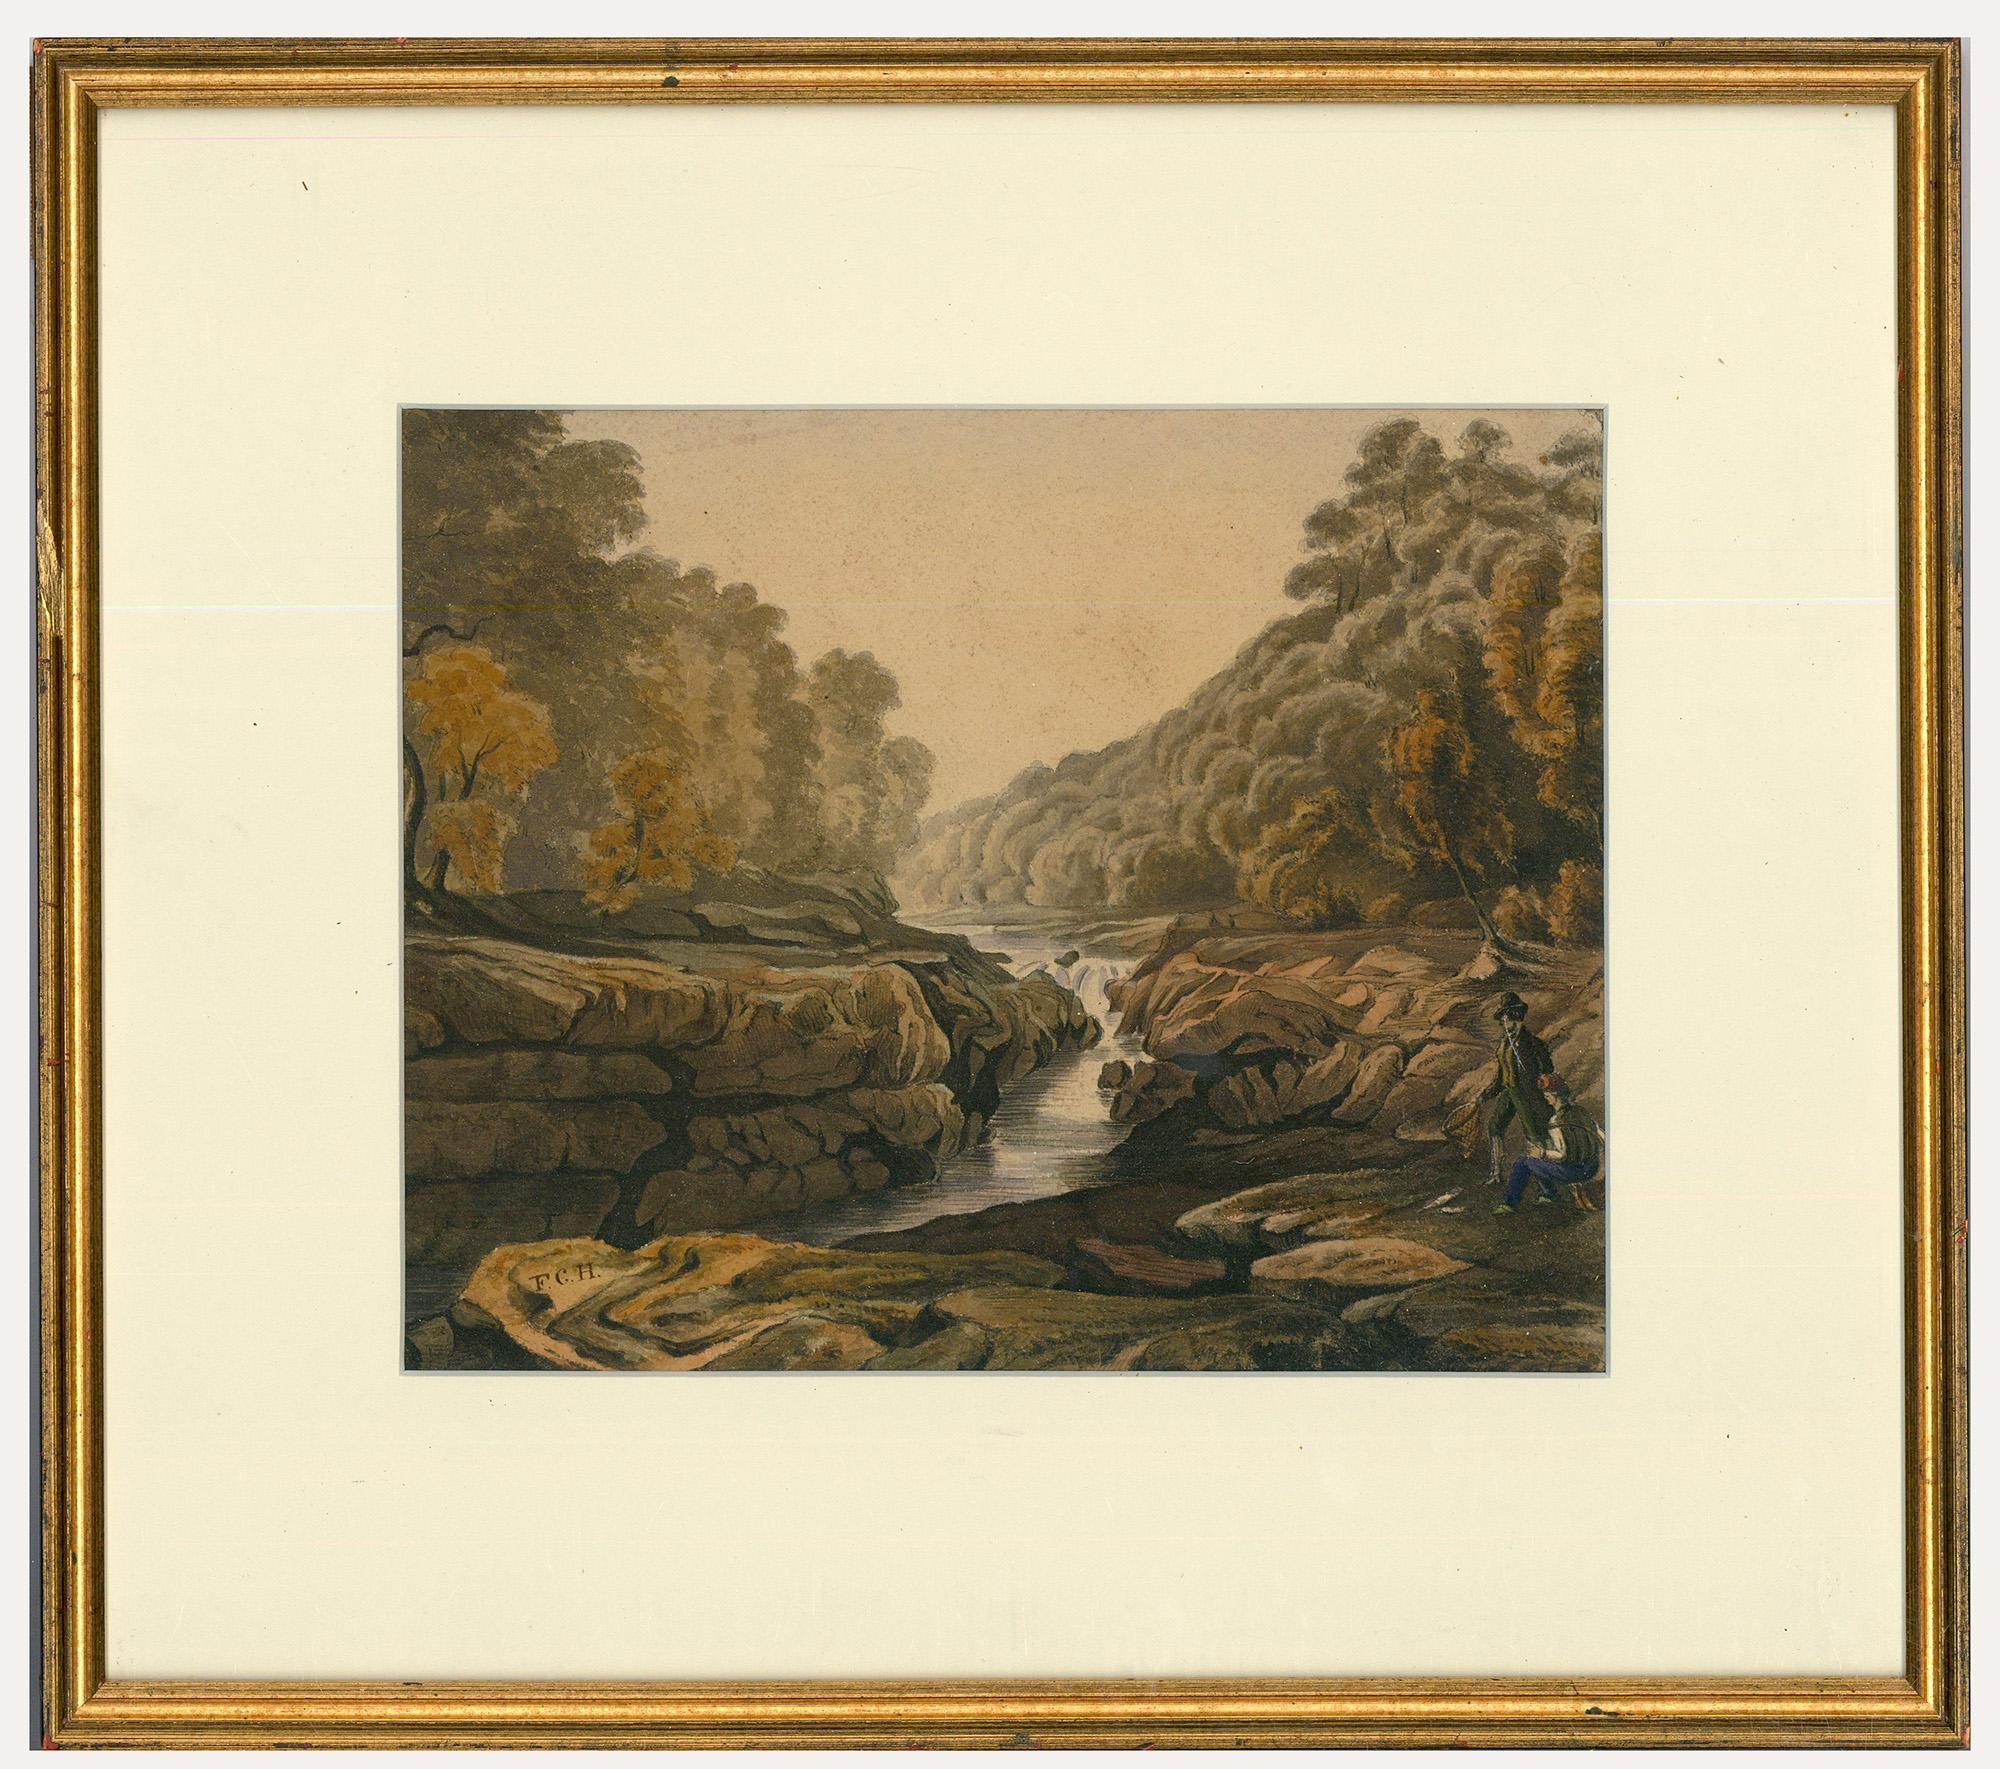 Unknown Landscape Art - F.C.H. - Framed 19th Century Watercolour, A Catch for Supper